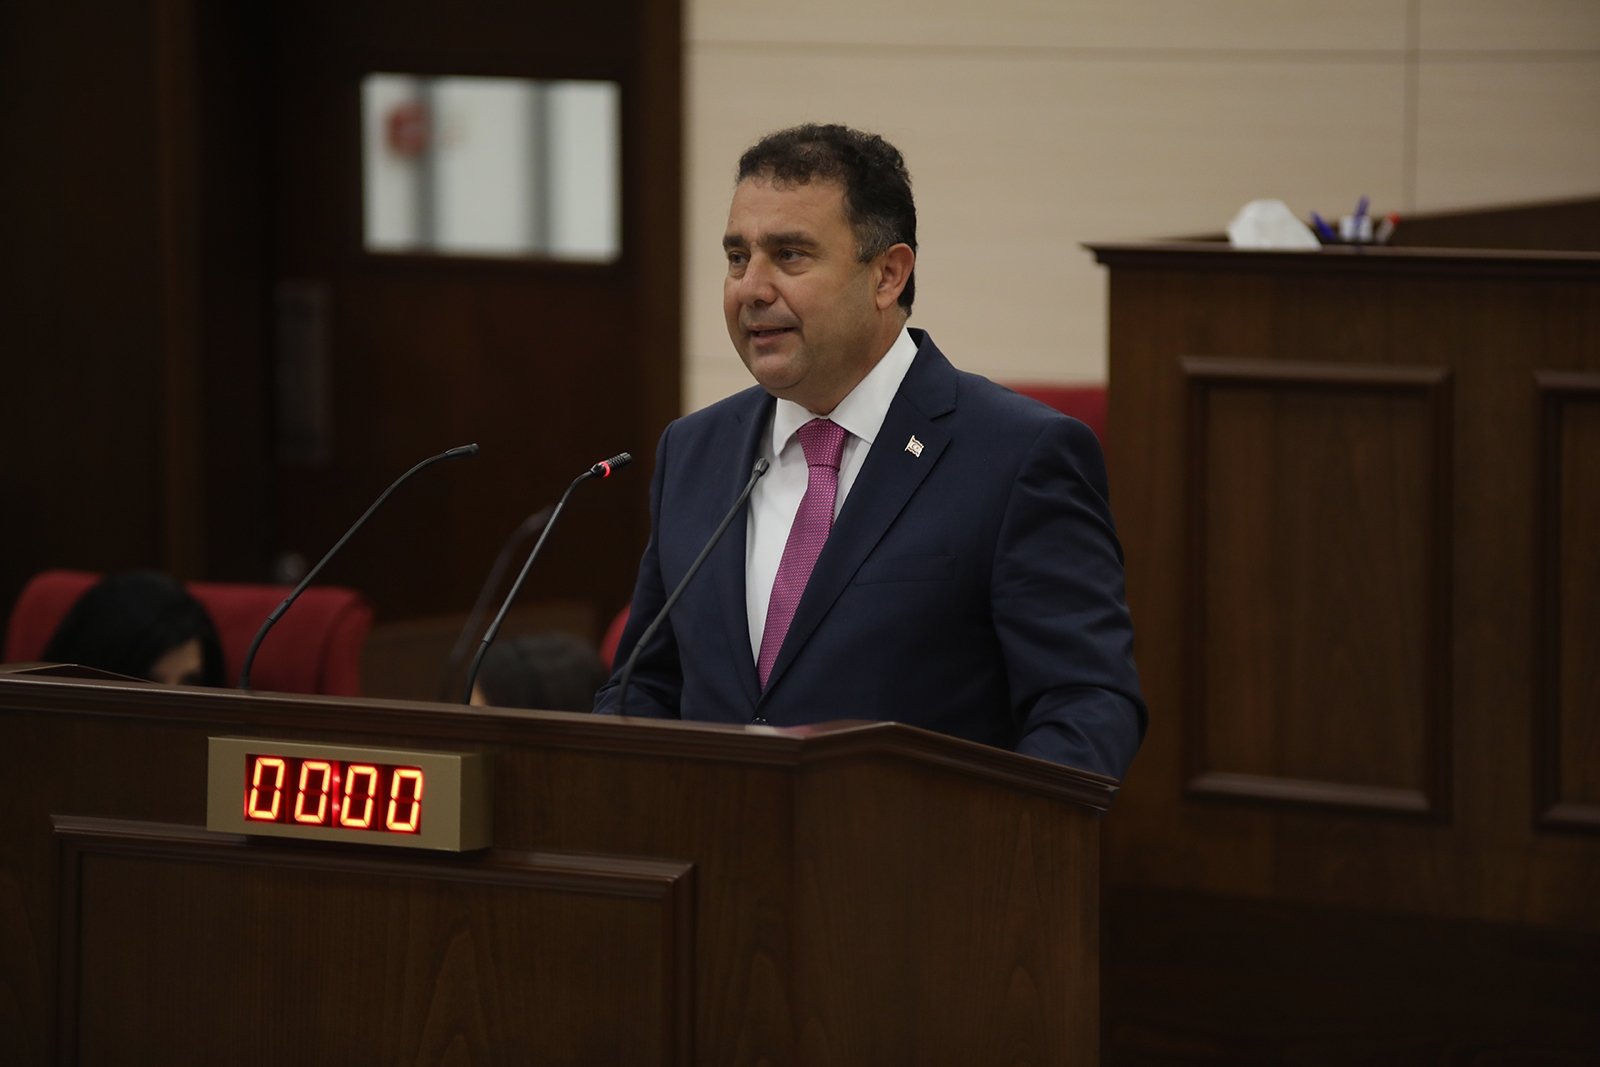 Turkish Republic of Northern Cyprus (TRNC) Prime Minister Ersan Saner speaks at the Assembly of the Republic, Lefkoşa (Nicosia), TRNC, Dec. 14, 2020 (AA Photo)